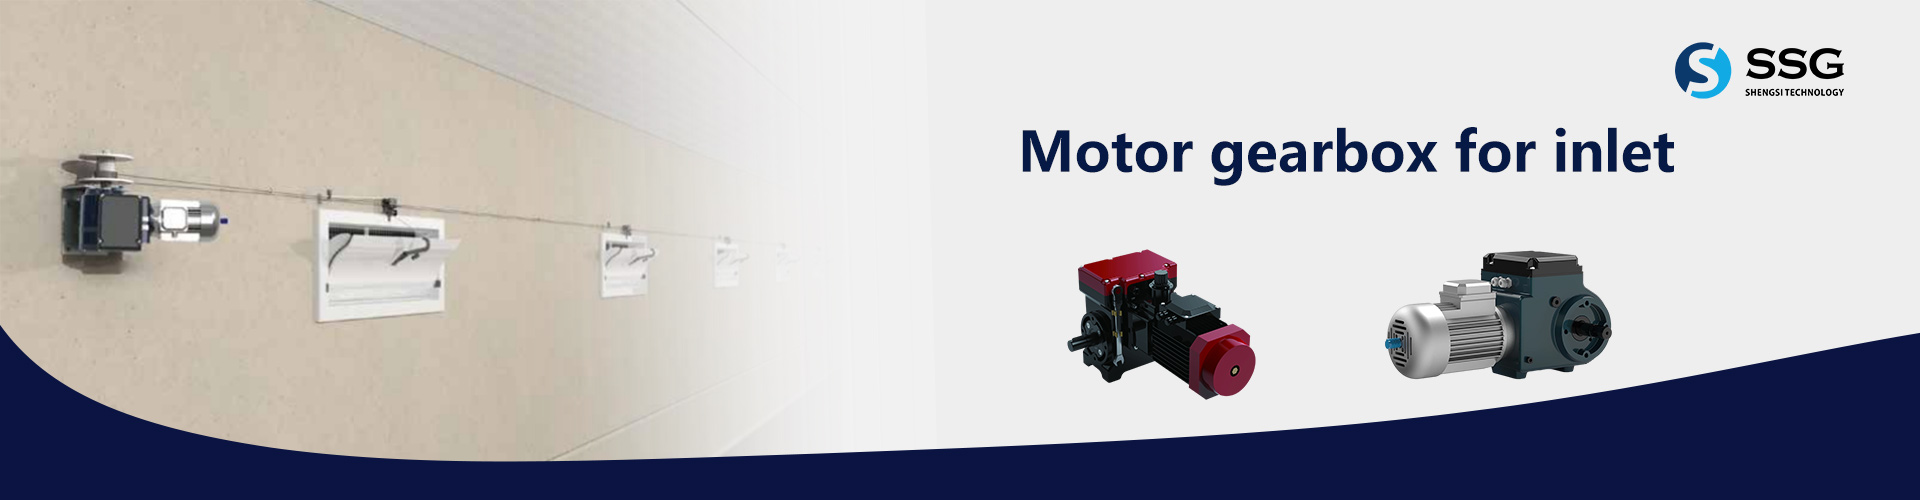 MOTOR-GEARBOX-FOR-INLETS-banner